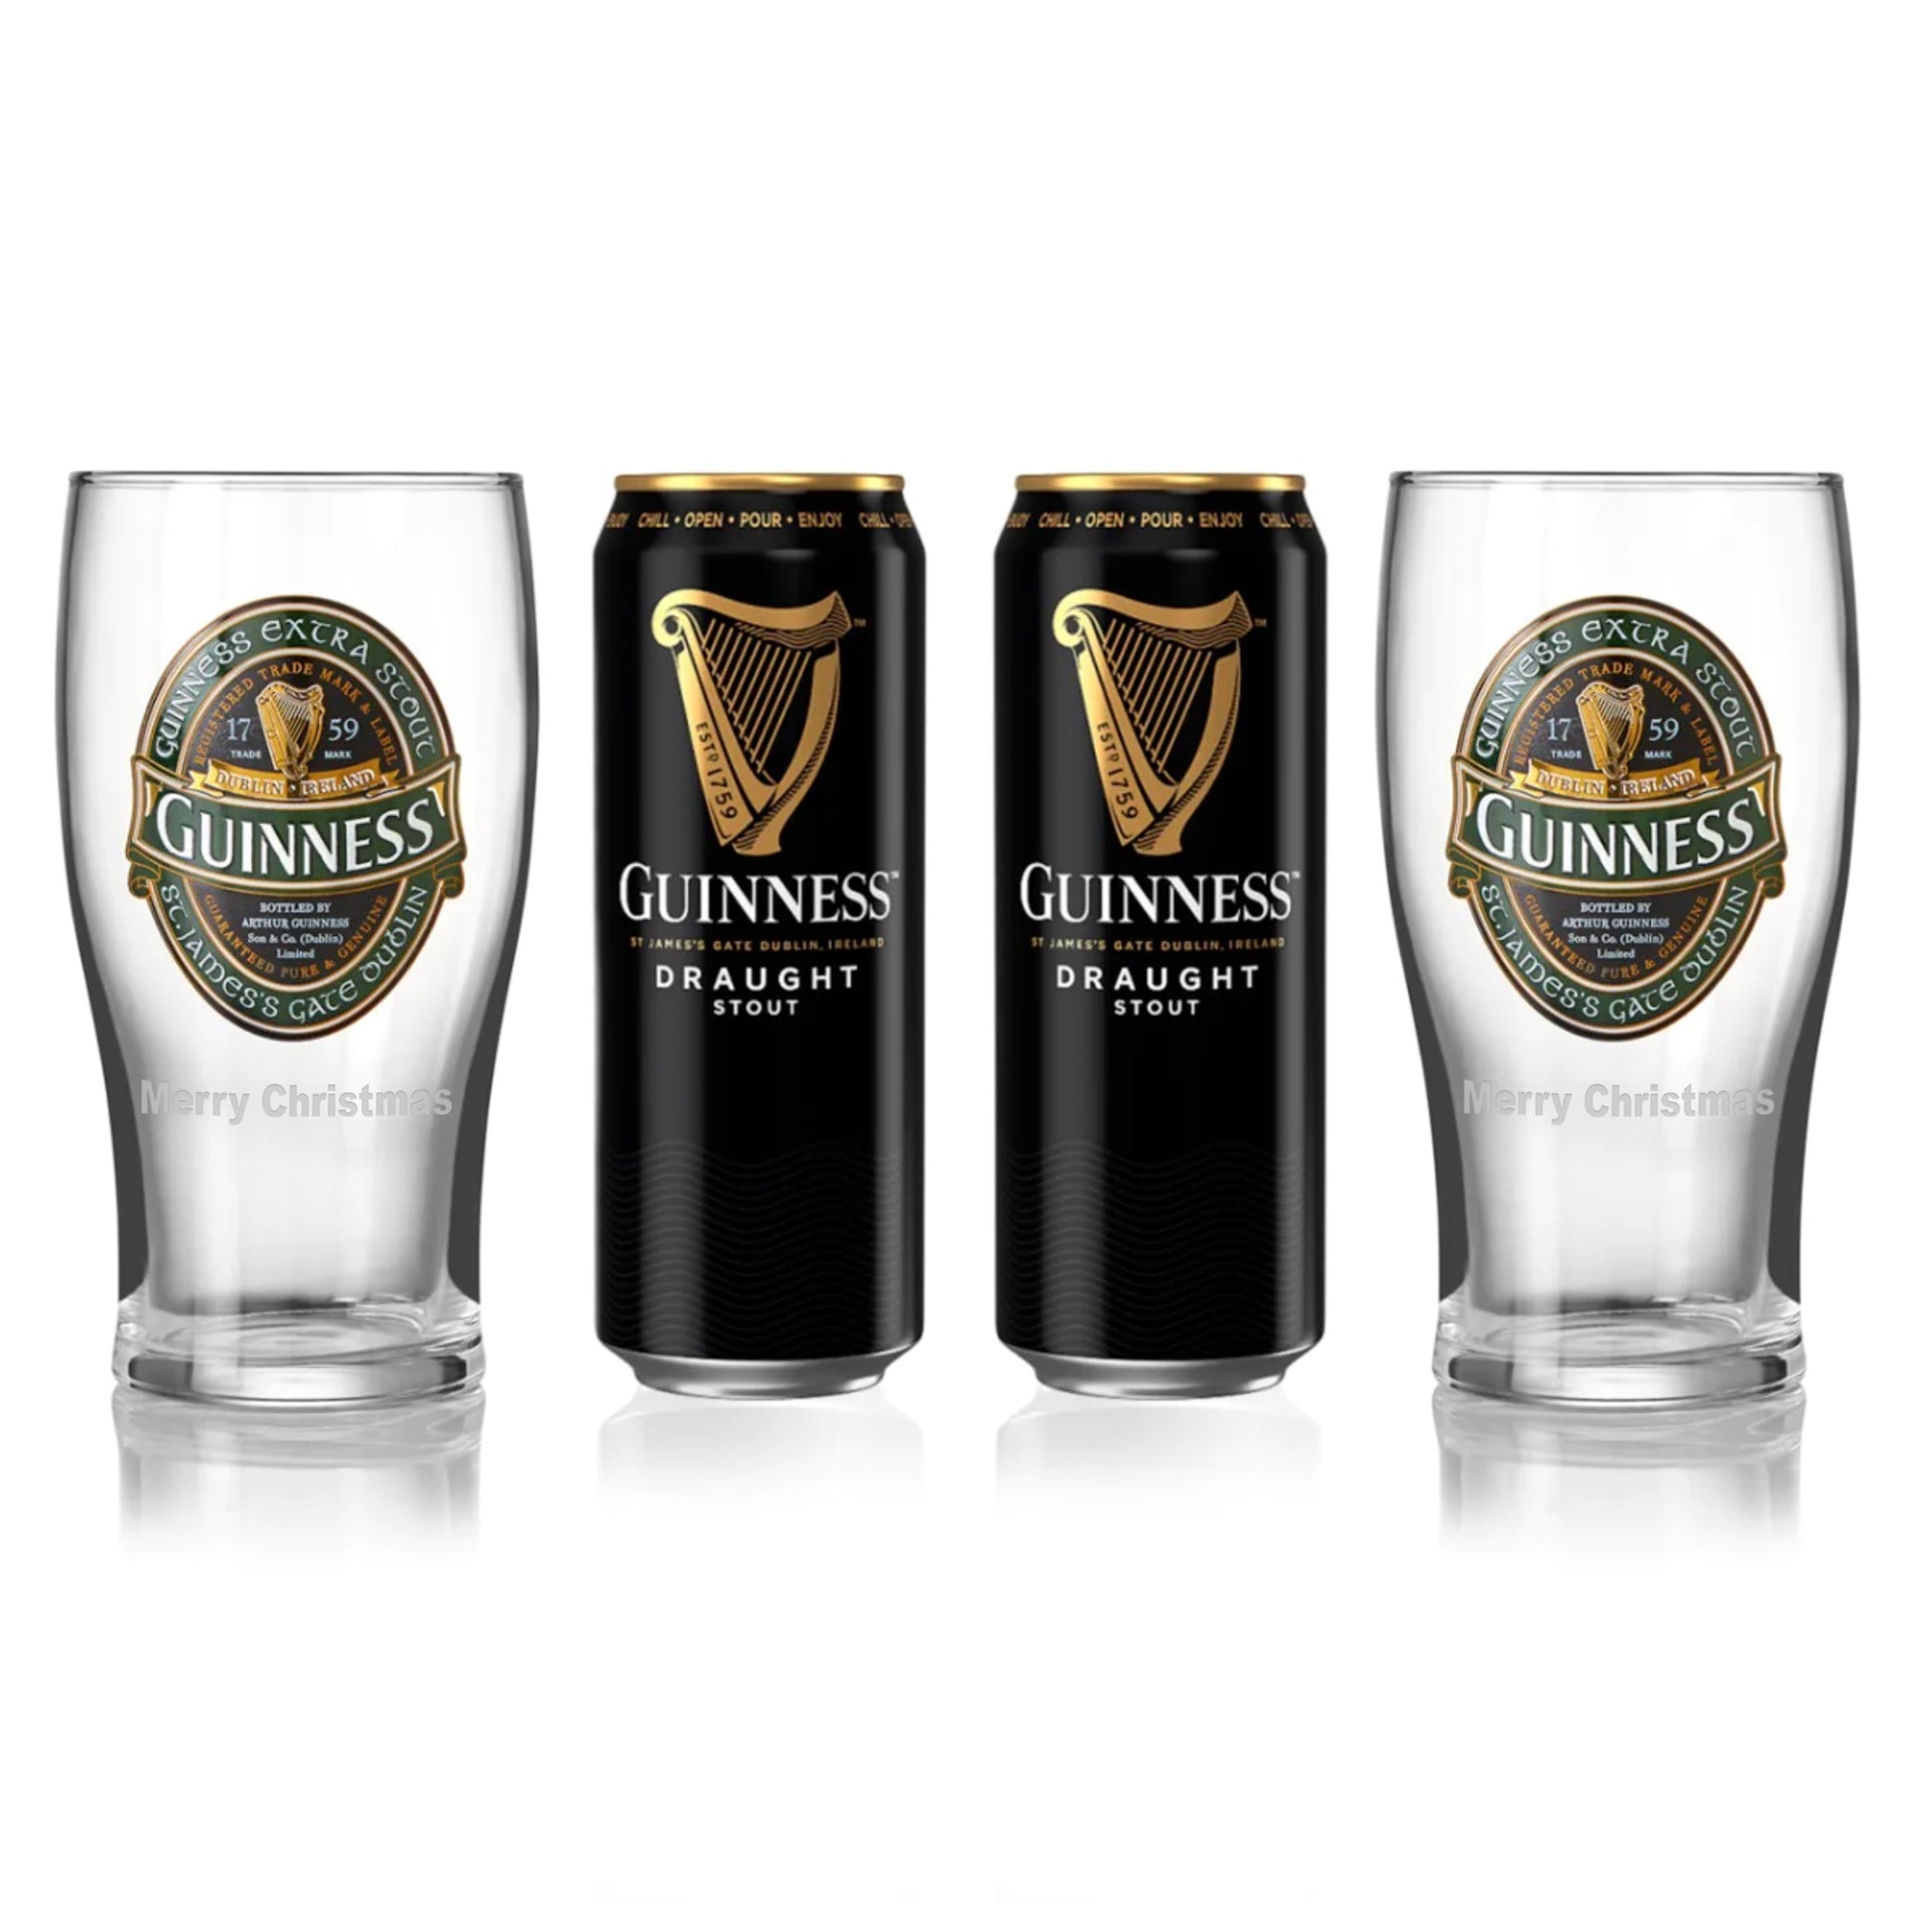 Two Guinness UK Guinness Ireland Collection Pint Glass + Can Twin Packs, each with the Guinness logo and a "Merry Christmas" inscription.